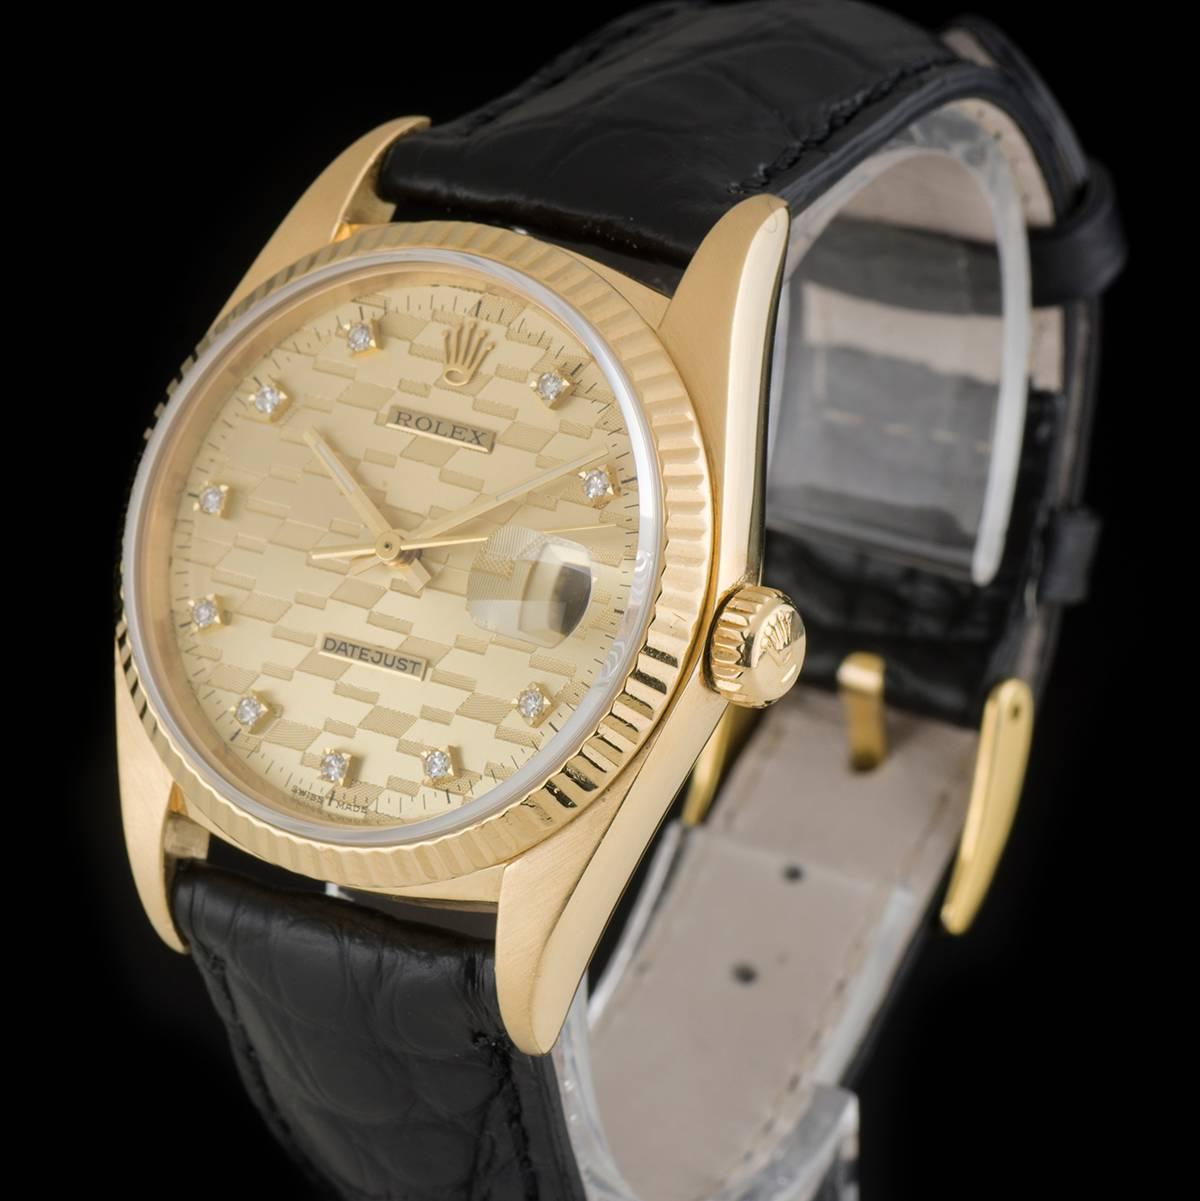 An 18k Yellow Gold Chevrolet Diamond Jubilee Award Datejust Gents Wristwatch, champane Chevrolet Logo dial with 10 applied round brilliant cut diamond hour markers, date at 3 0'clock, a fixed 18k yellow gold fluted bezel, a brand new black leather